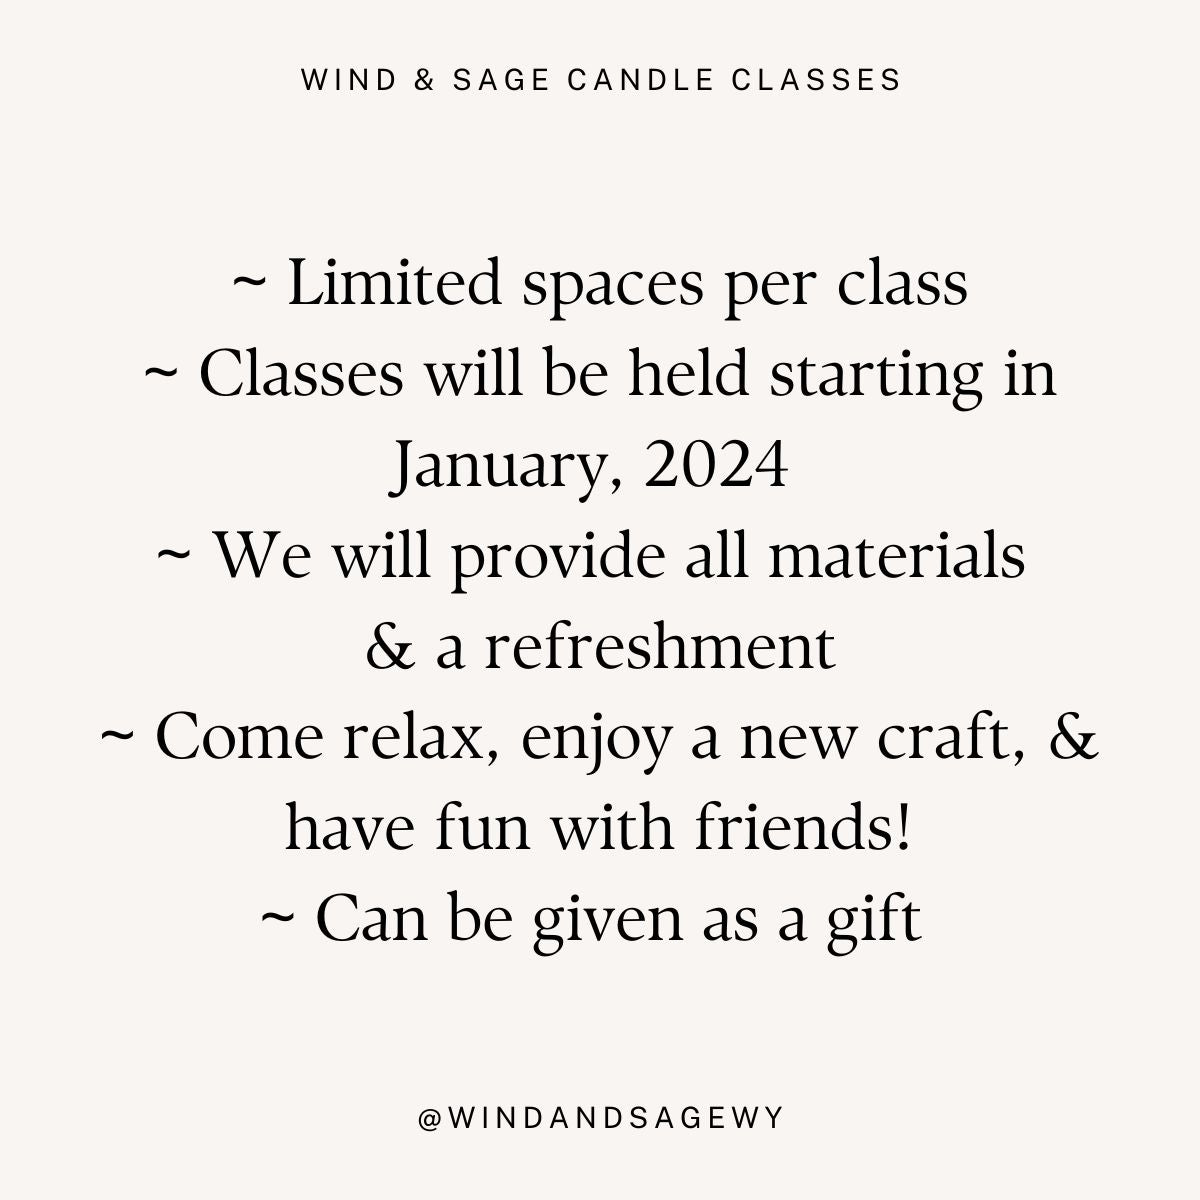 Wind & Sage Candle Class